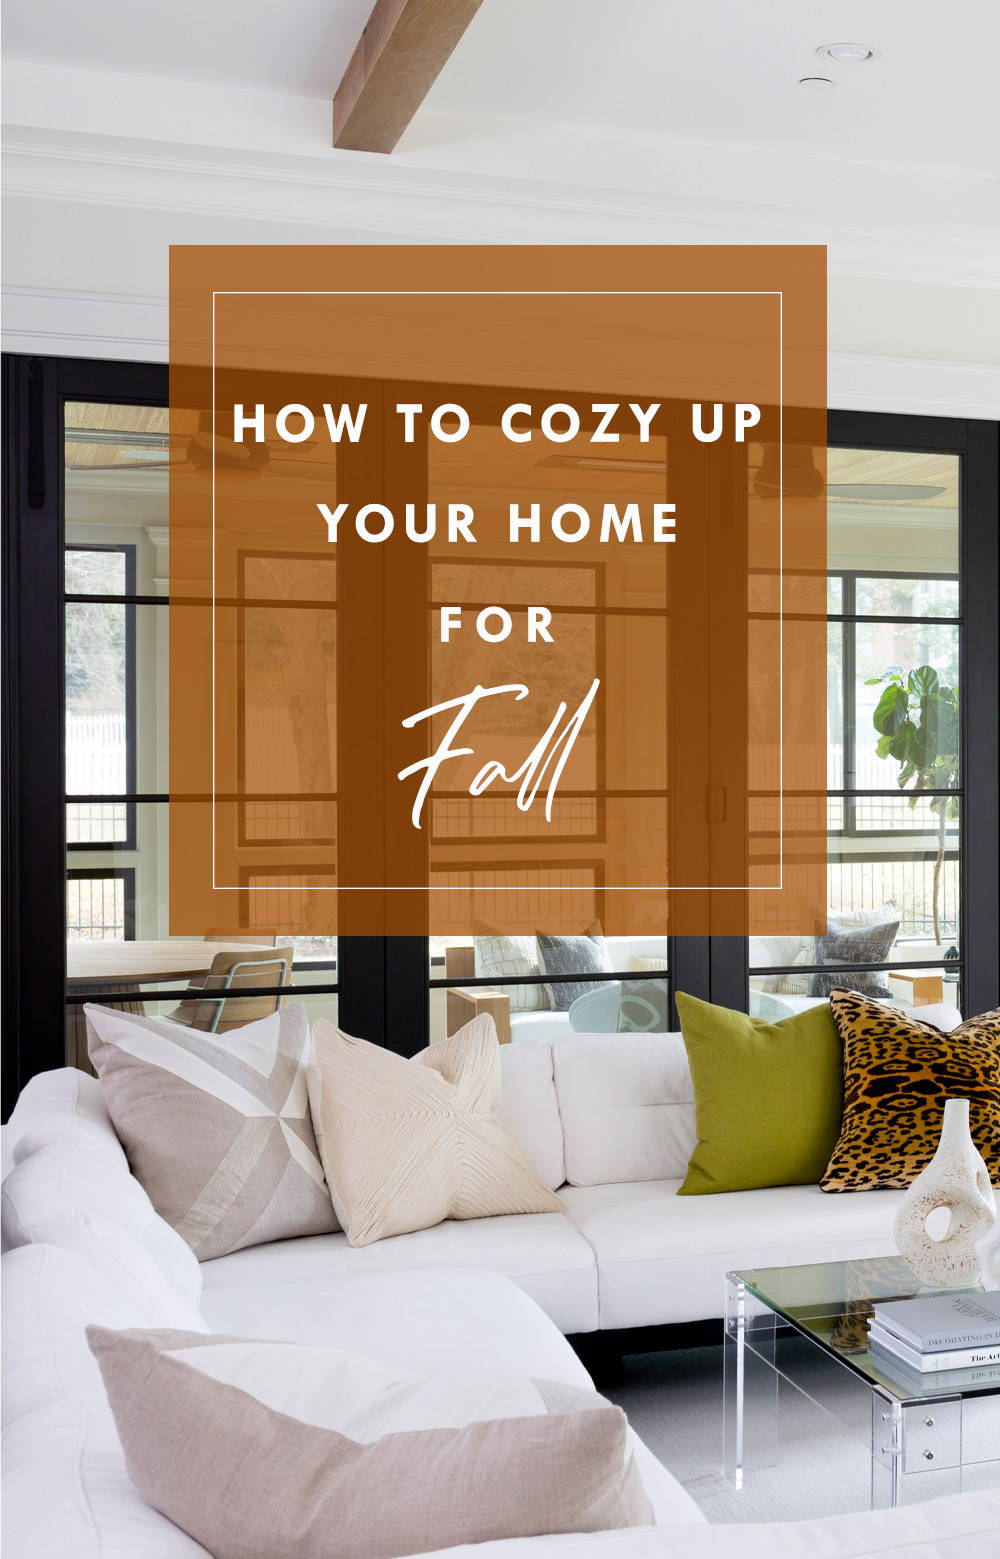 How to Cozy Up Your Home for Fall